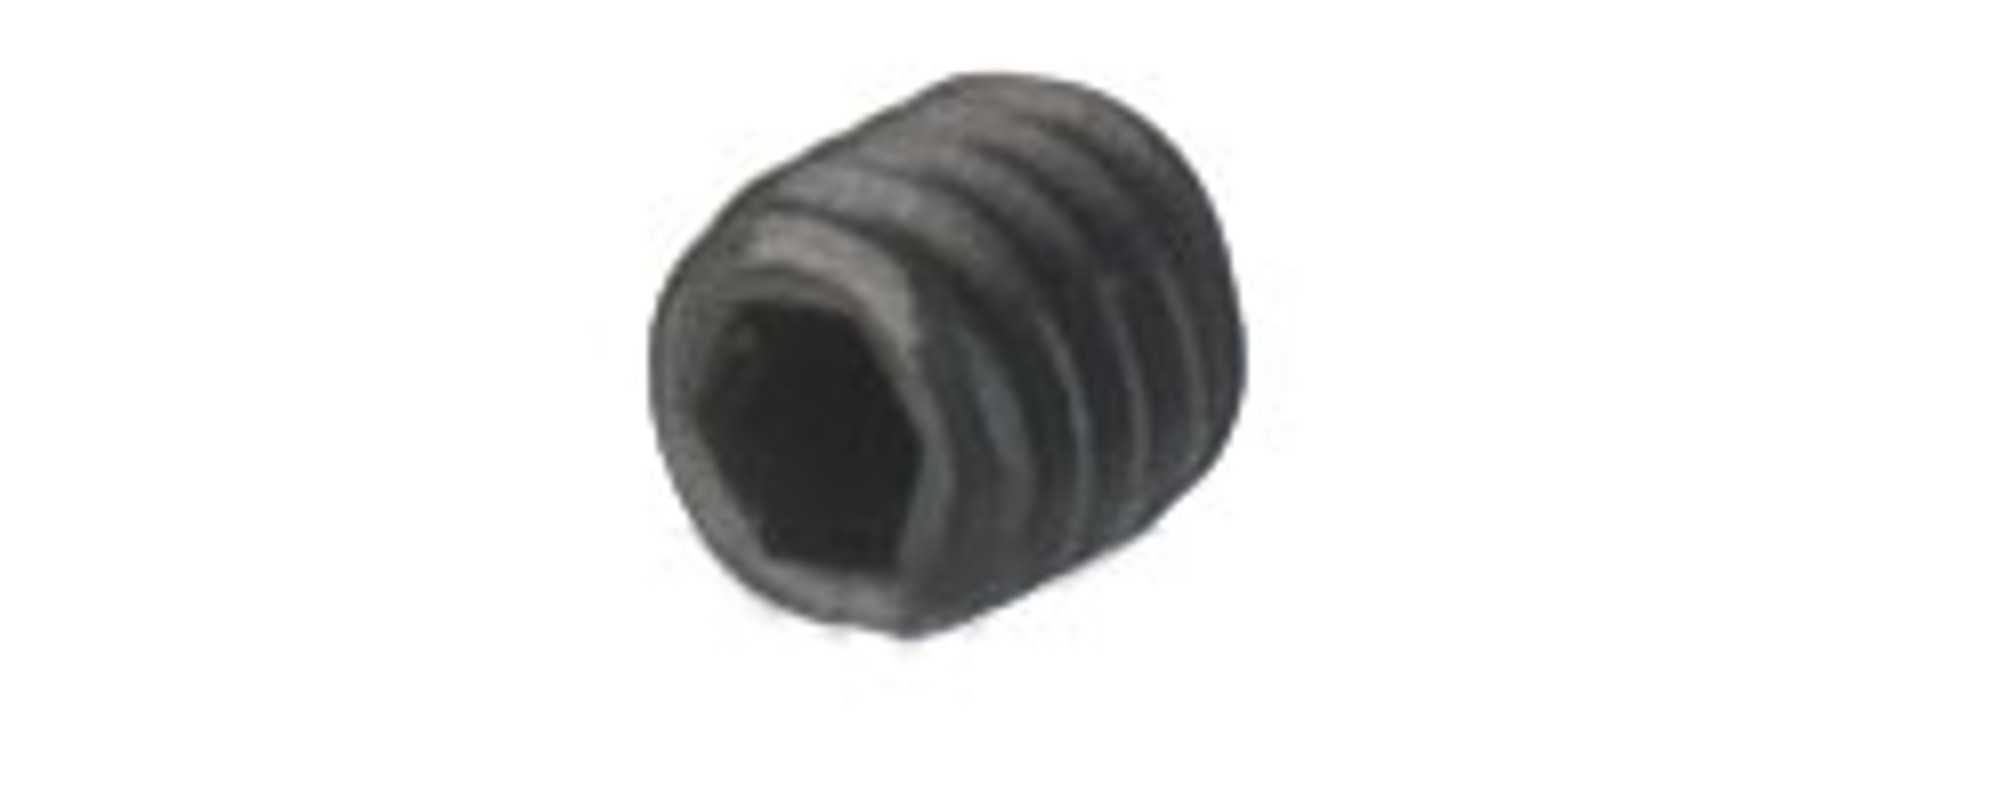 WE-Tech Barrel Part #125 for G39 Series Airsoft GBB Rifle